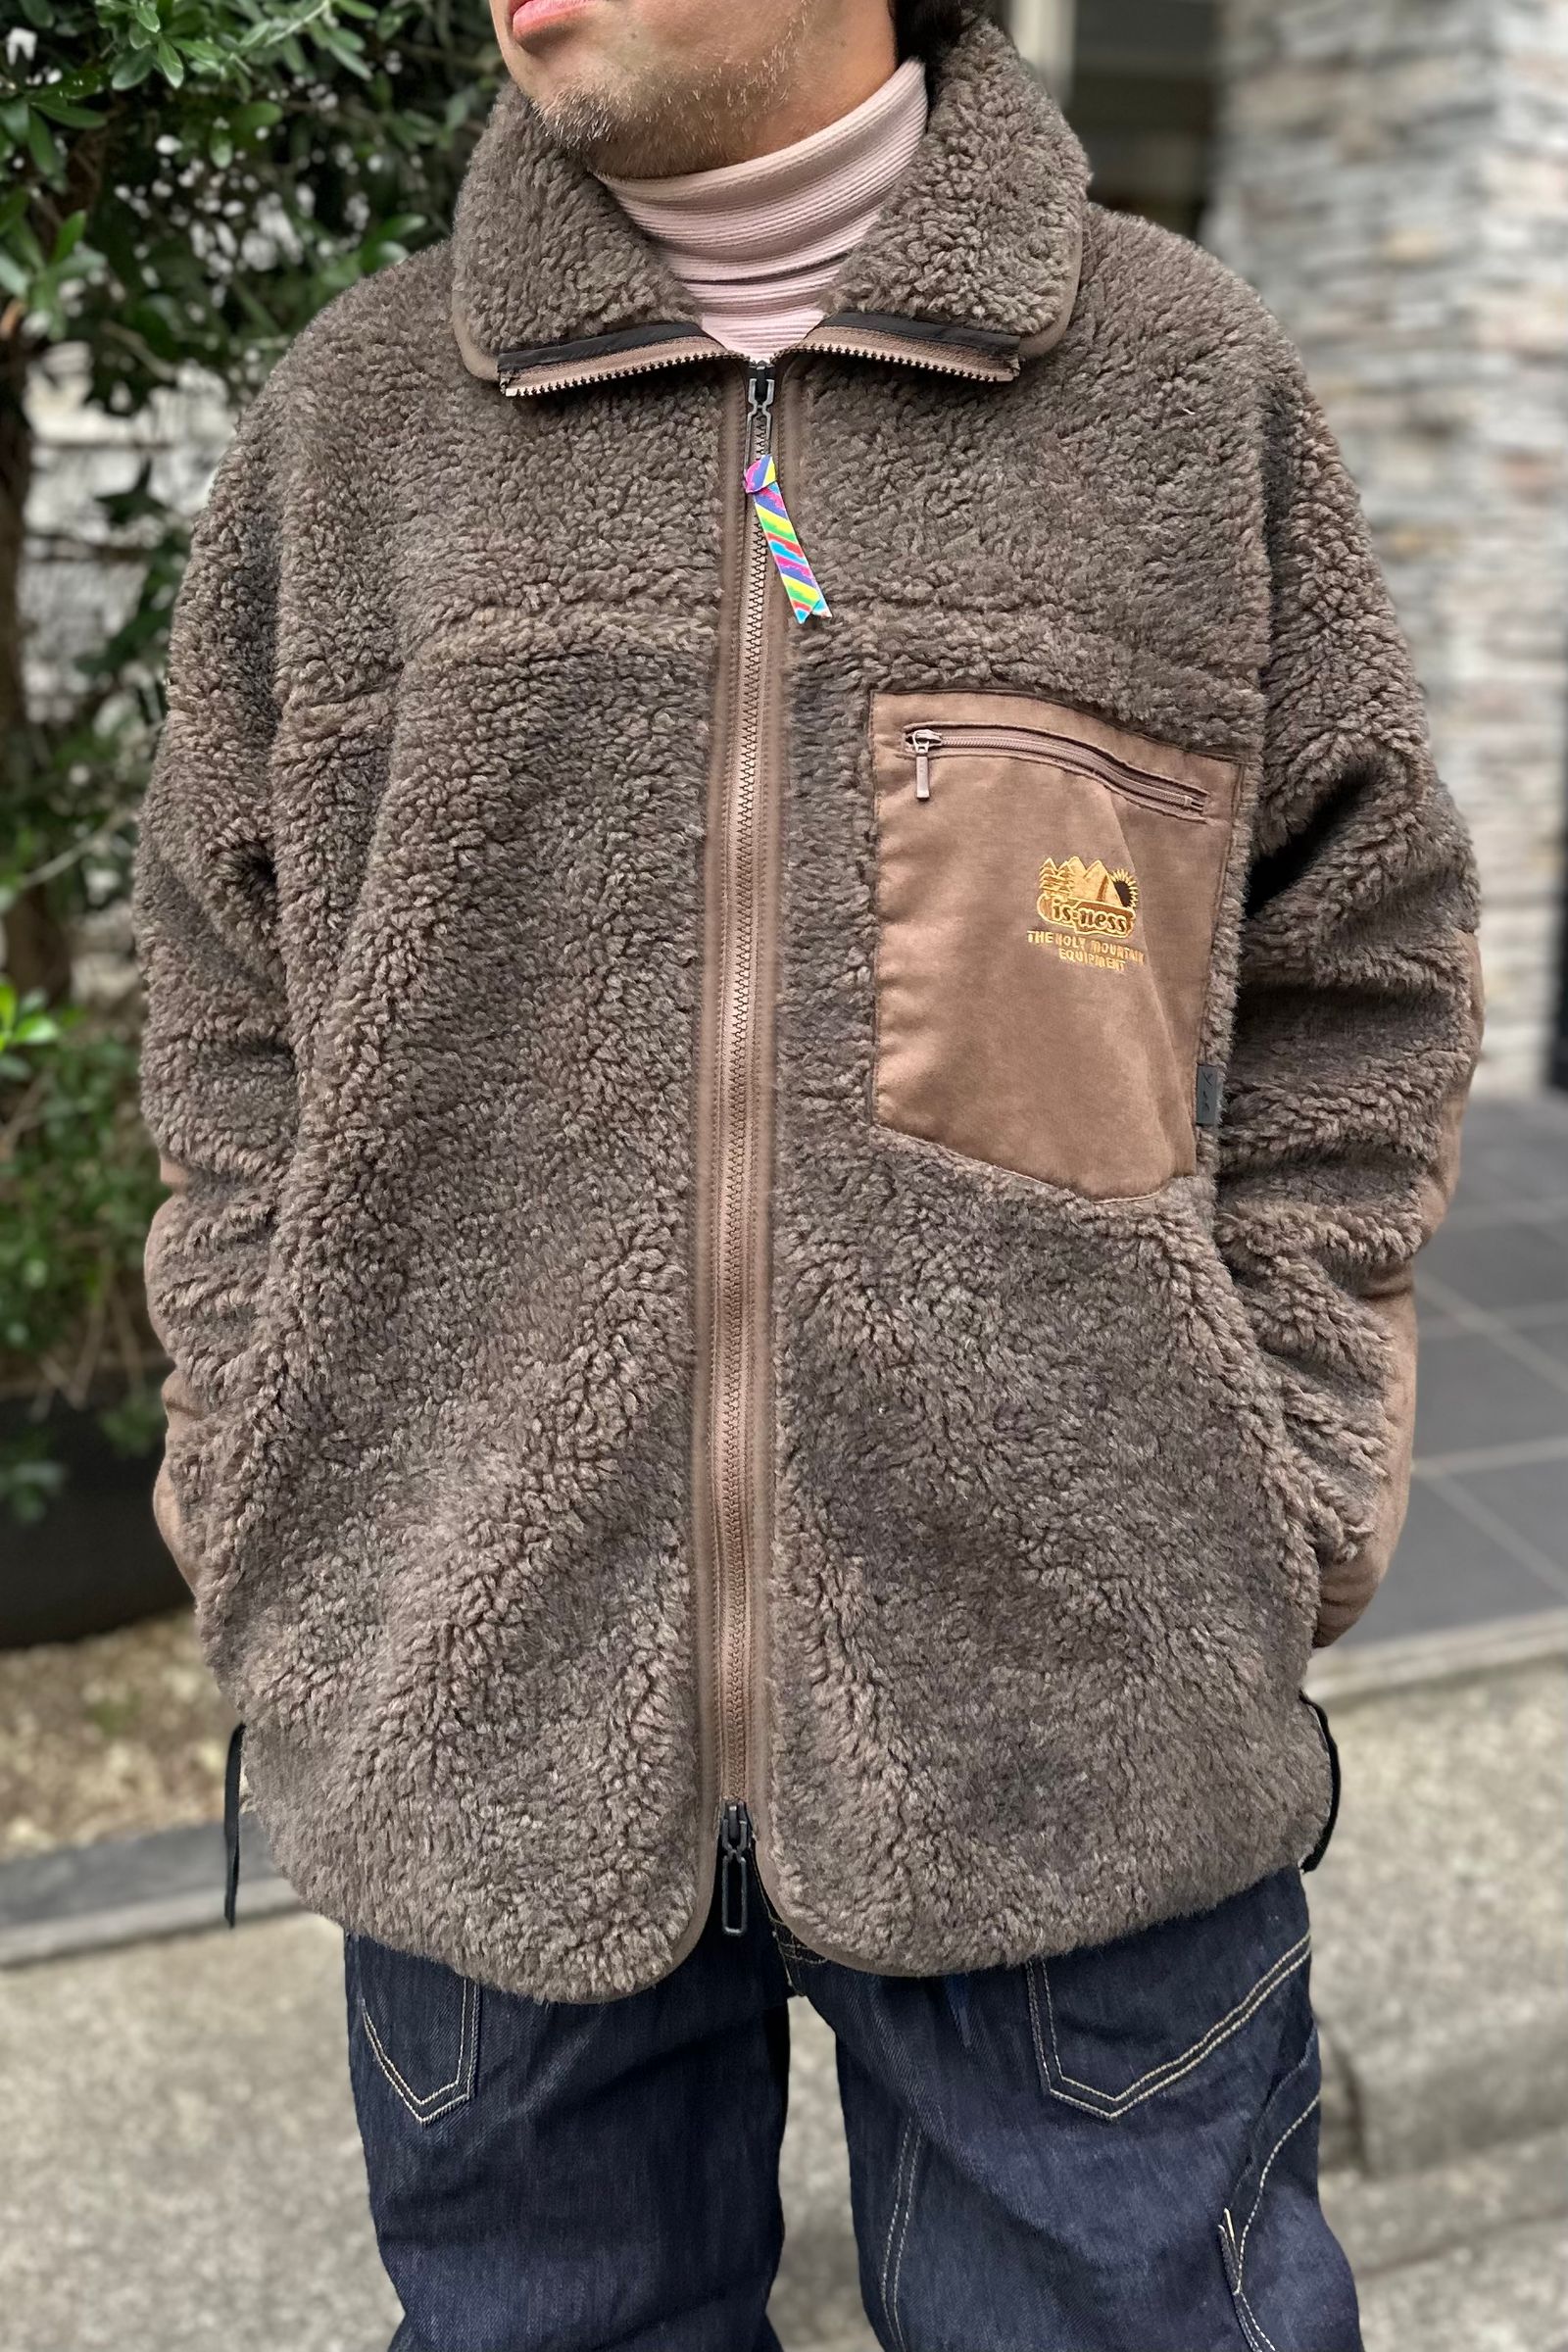 is-ness - THM FLEECE JACKET is-ness×Y(dot) BY NORDISK -MOCHA- 23aw